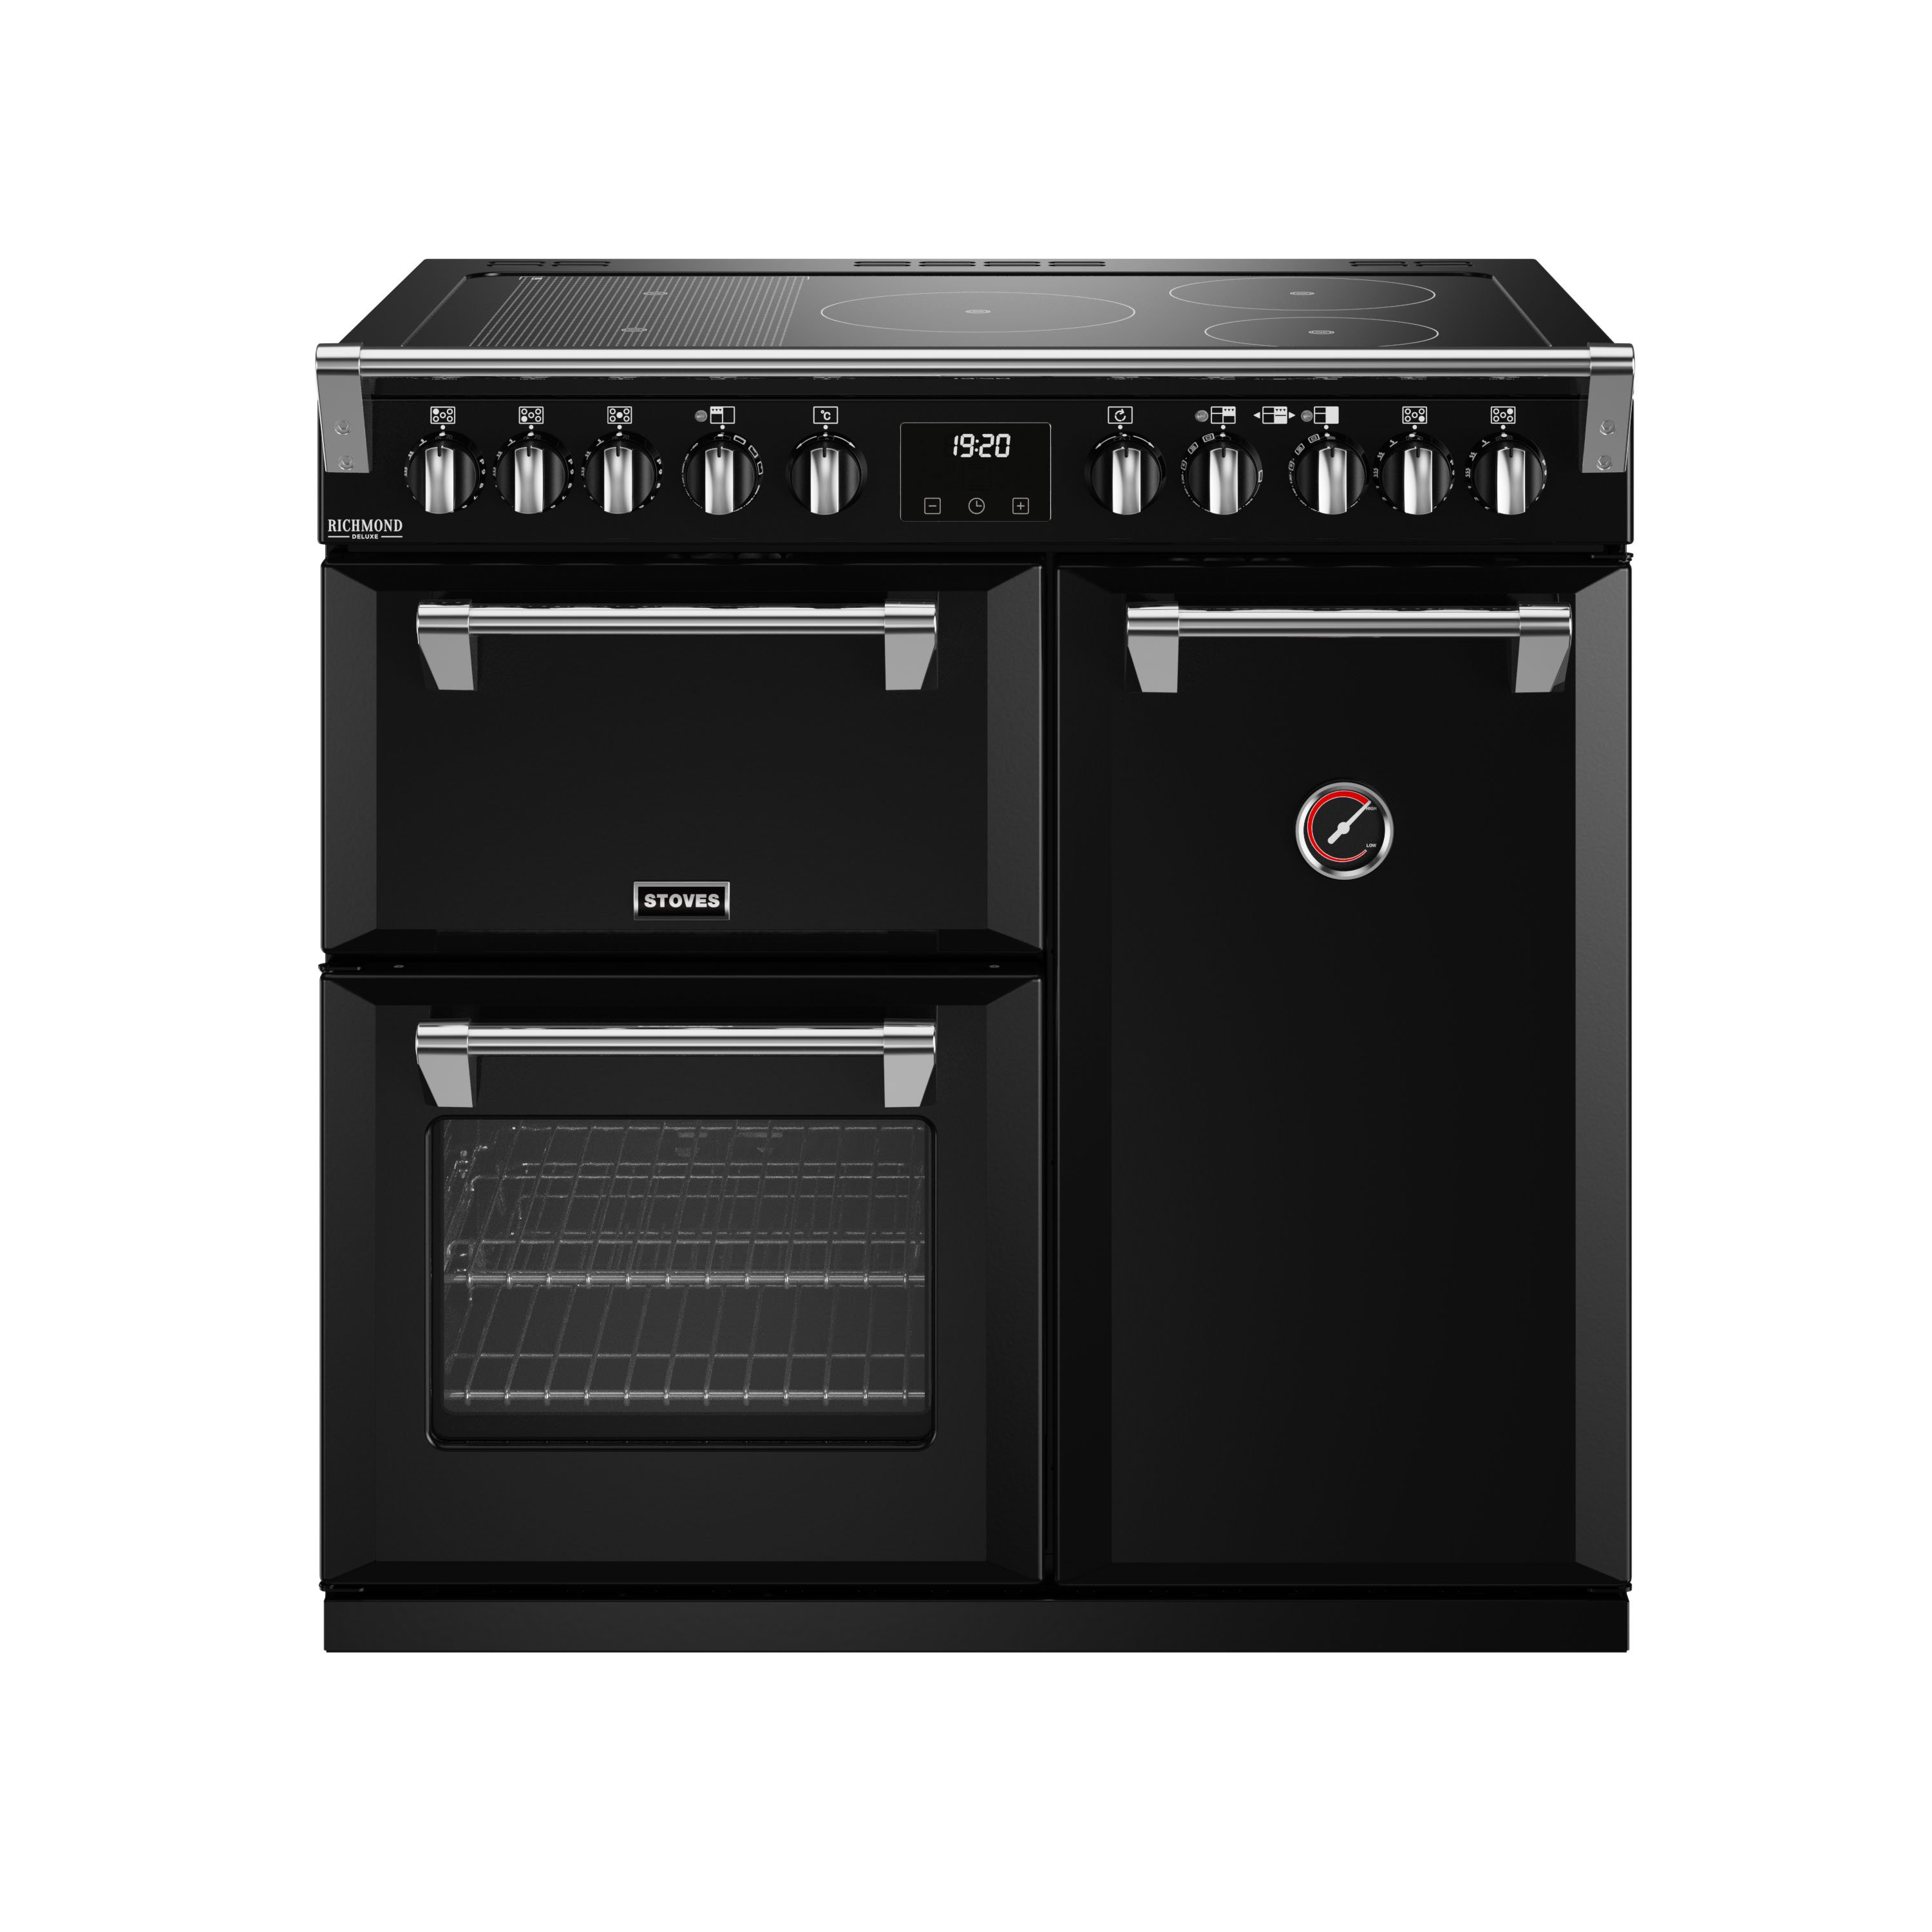 90cm electric induction range cooker with a 5 zone rotary contol hob, conventional oven & grill, multifunction main oven with TrueTemp digital thermostat, and tall fanned oven with PROFLEX™